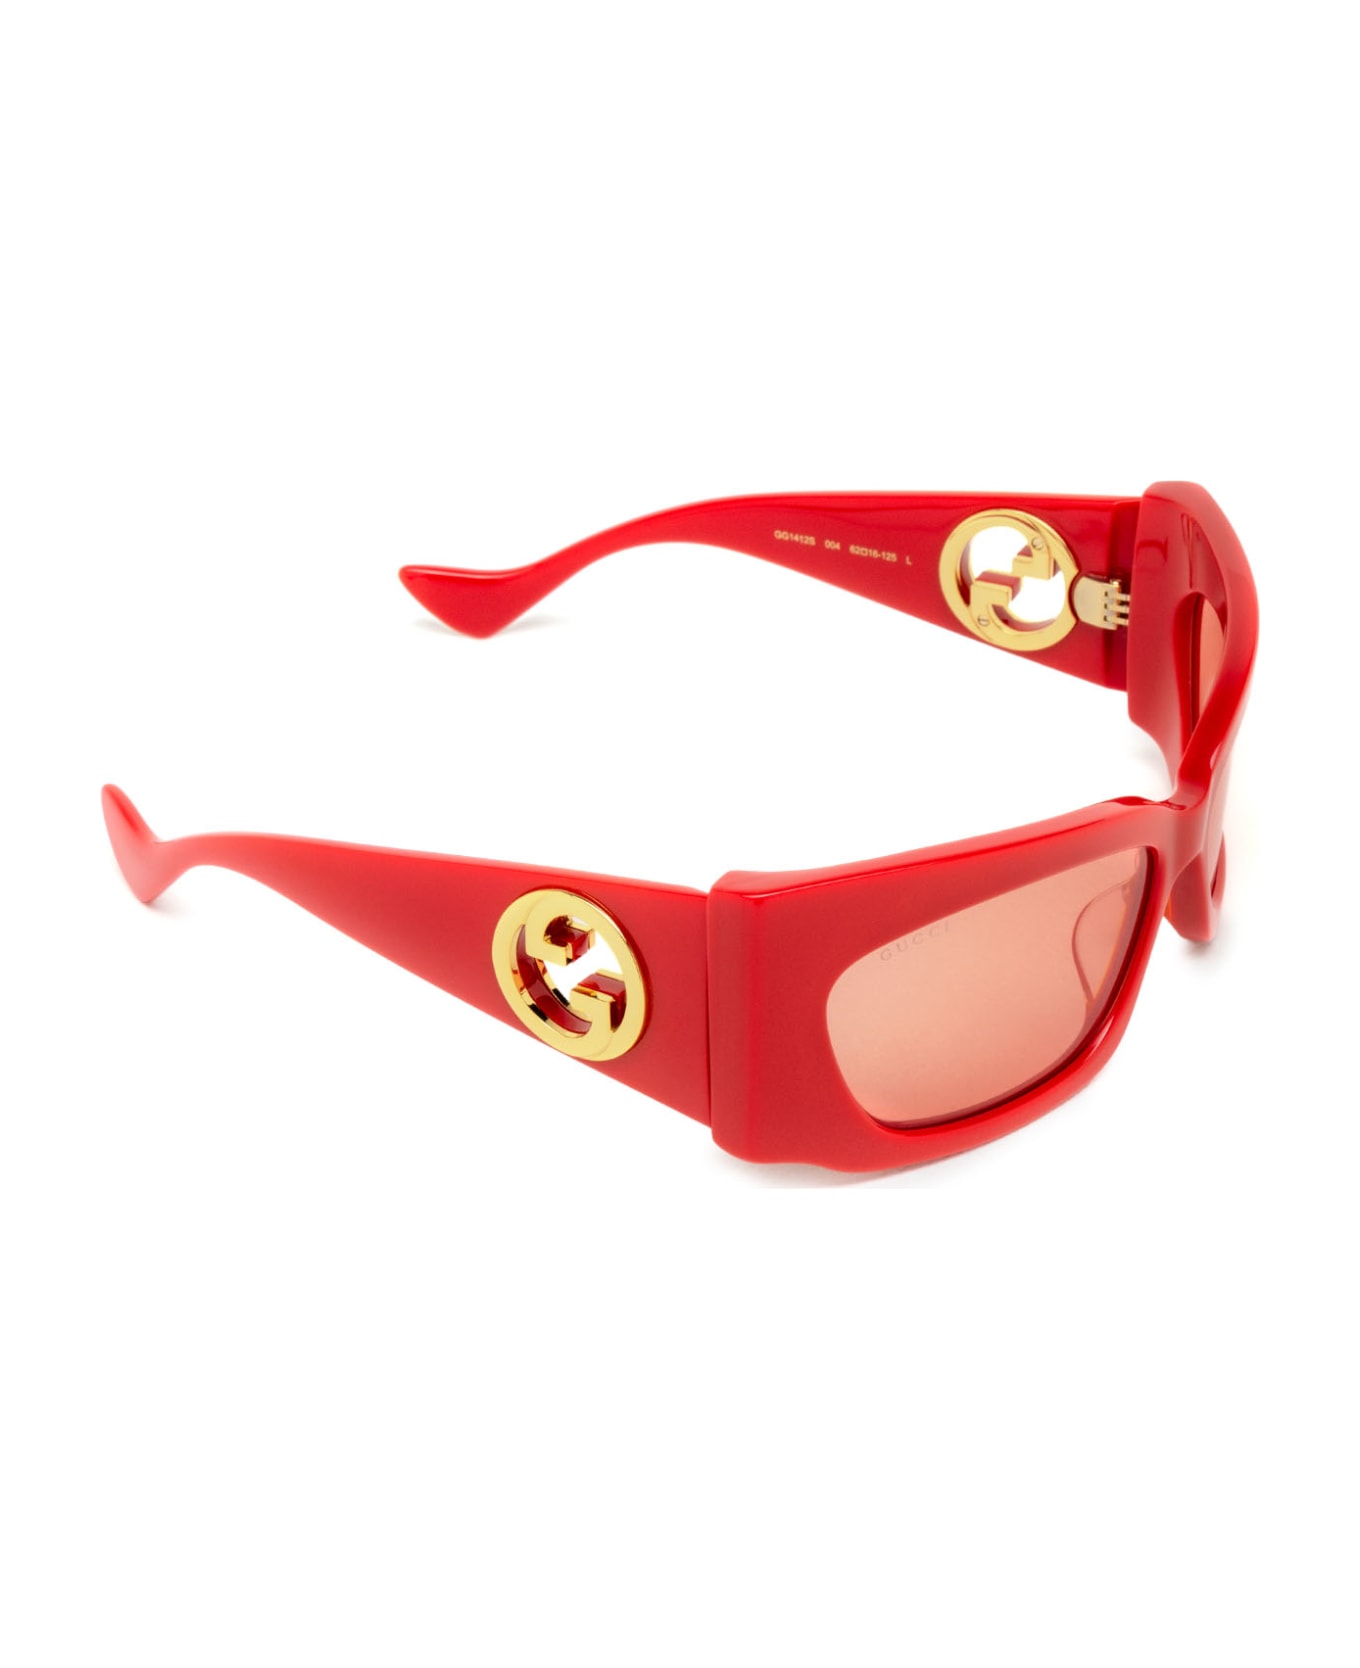 Gucci Eyewear Gg1412s Red Sunglasses - Red